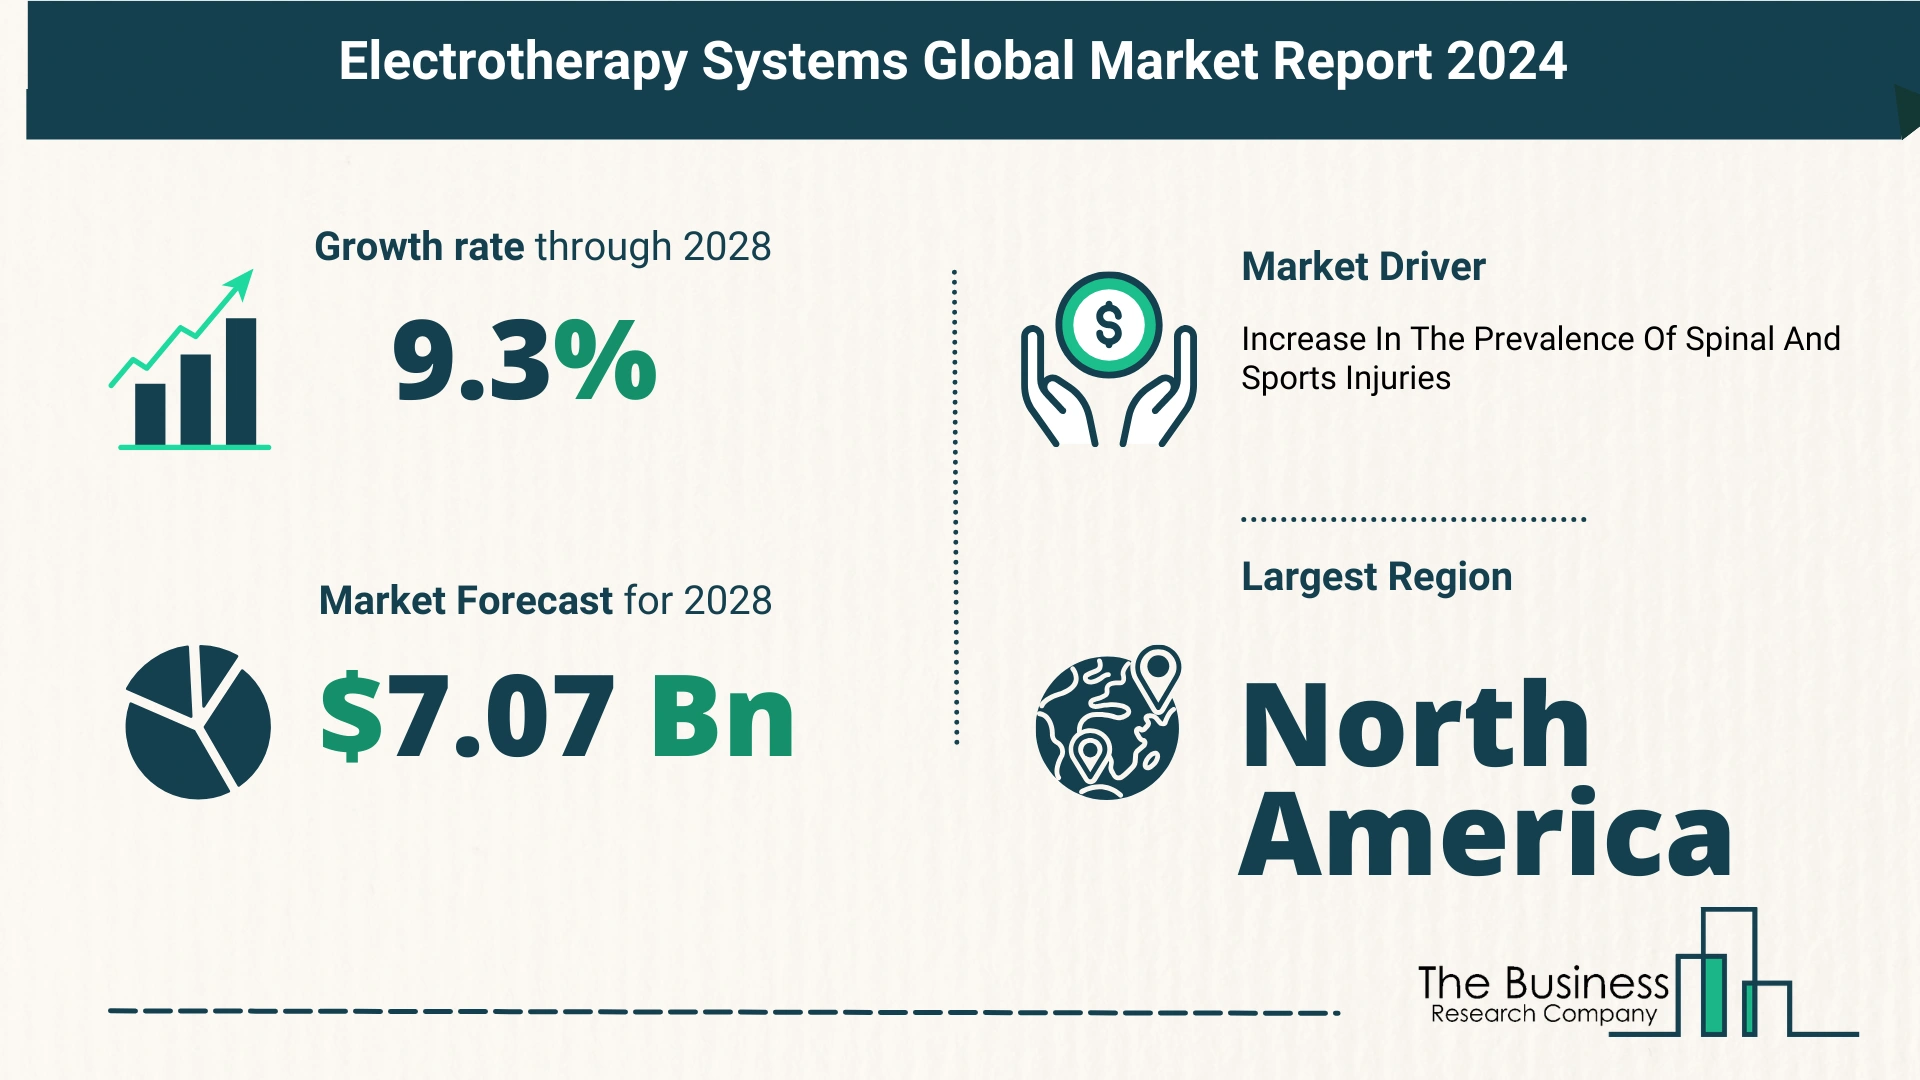 Top 5 Insights From The Electrotherapy Systems Market Report 2024